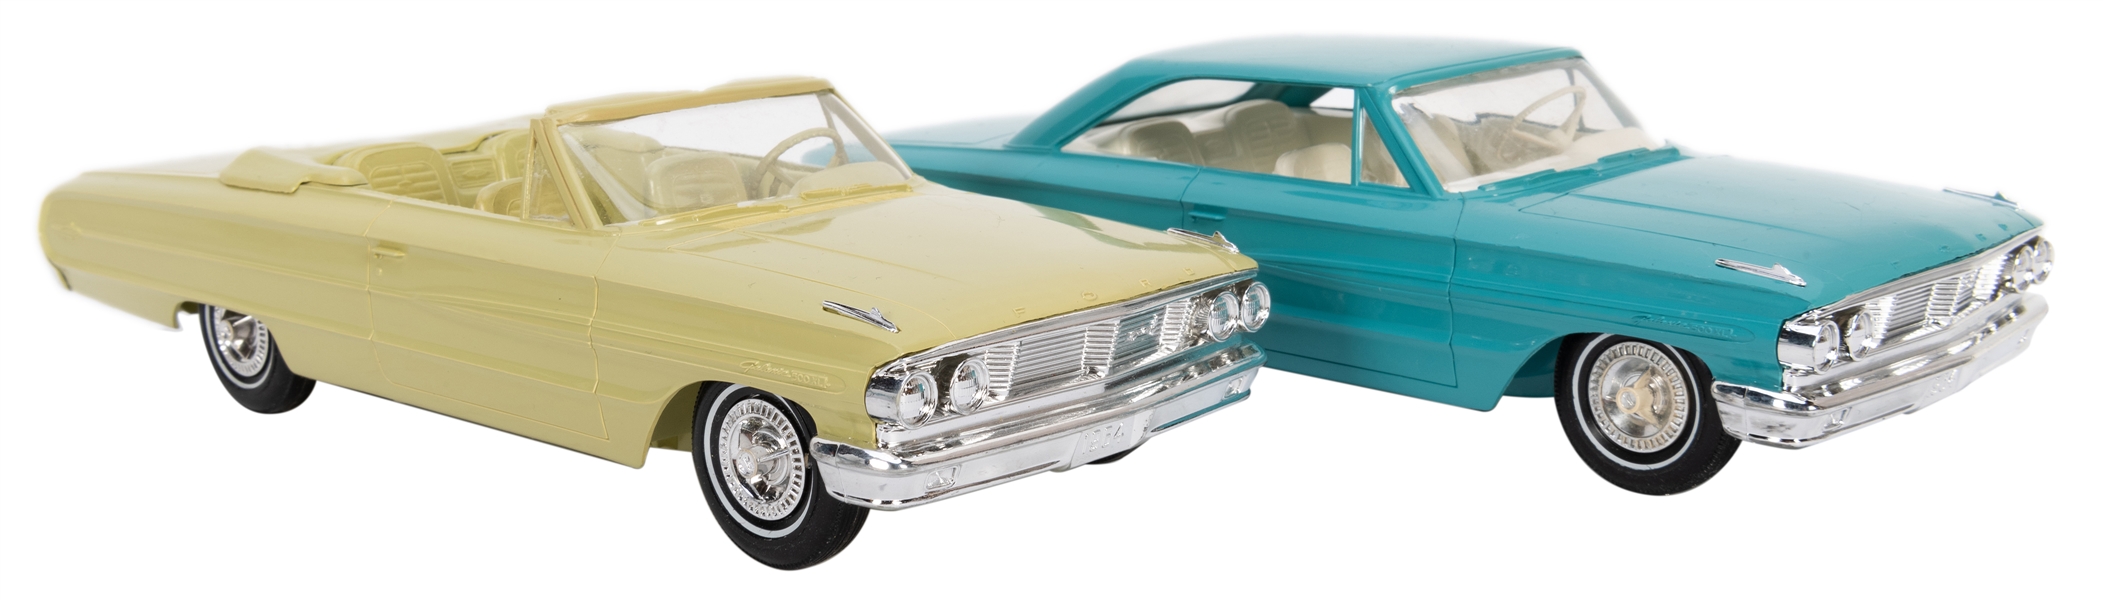  Lot of 2 1964 Ford Galaxie 500 XL Promo Cars.-